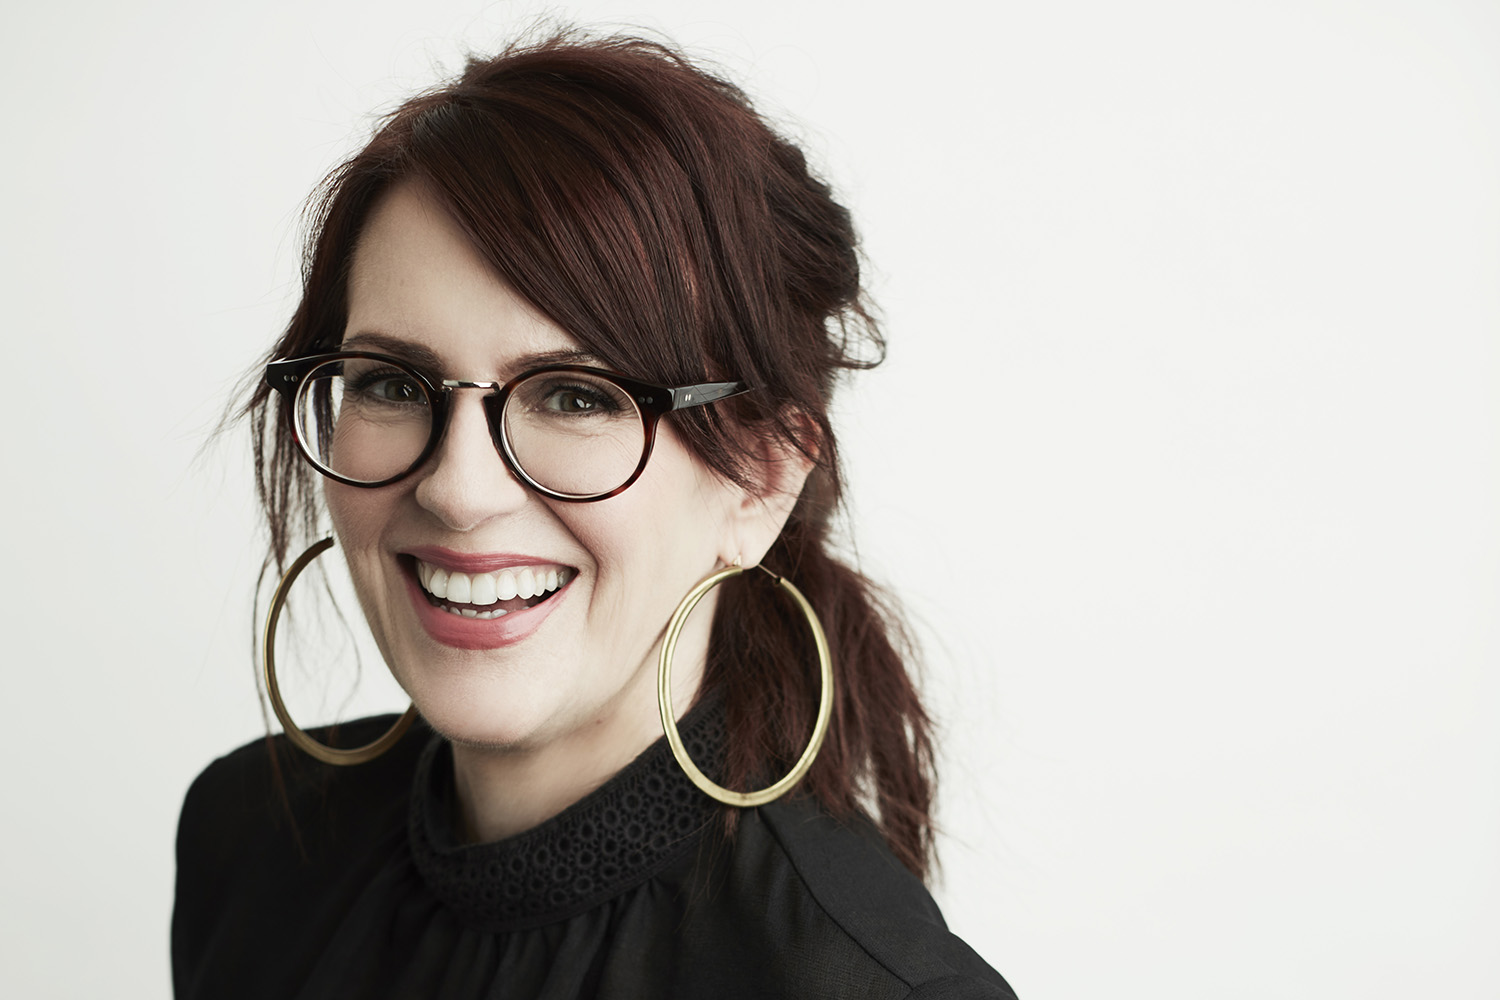 Megan Mullally Reveals The Women Who Inspire Her